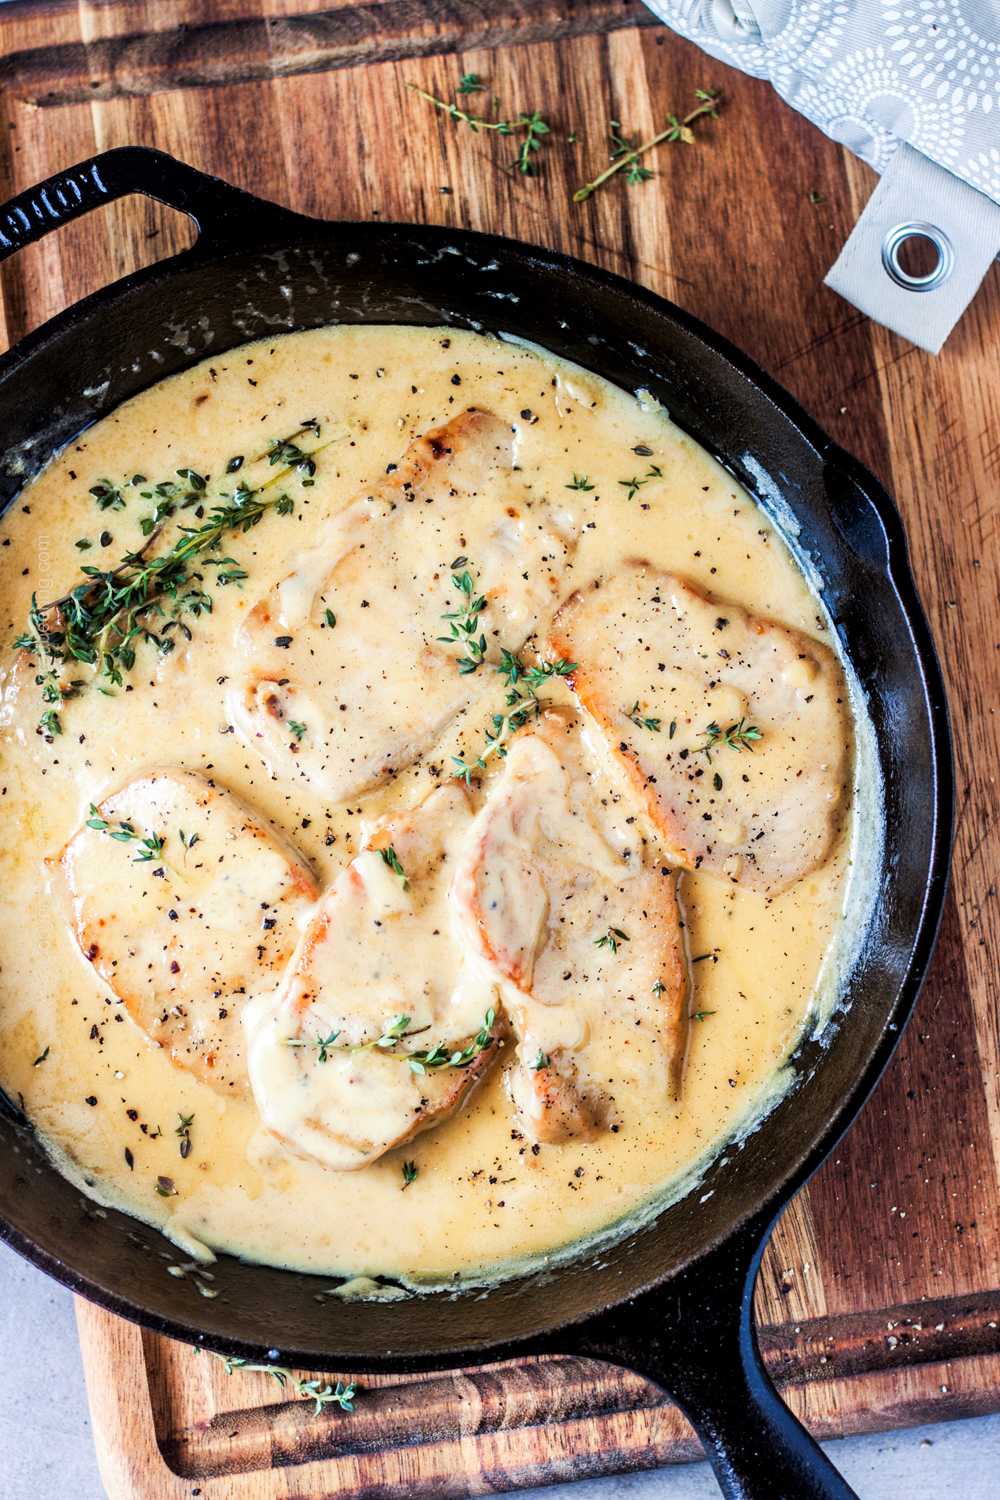 Stove top thin pork chops with creamy sauce, one the best pork cutlet recipes.